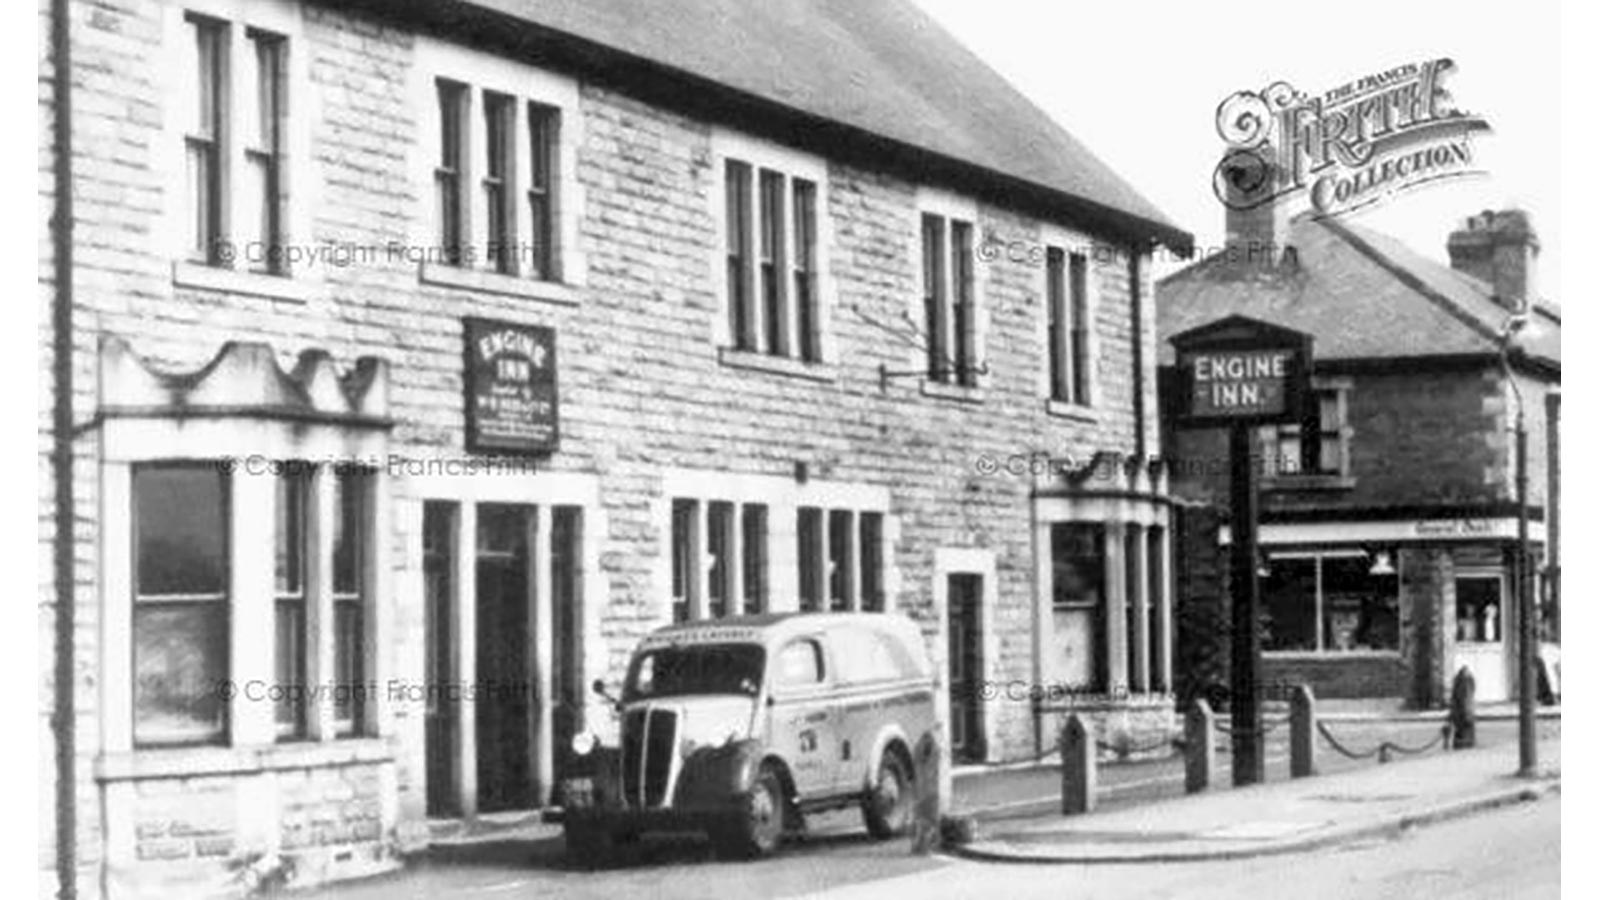 image of the Engine Inn © The Francis Frith Collection - 1955. The name is believed to have come from the stationery steam engine used here to haul waggons up the Walbottle incline.